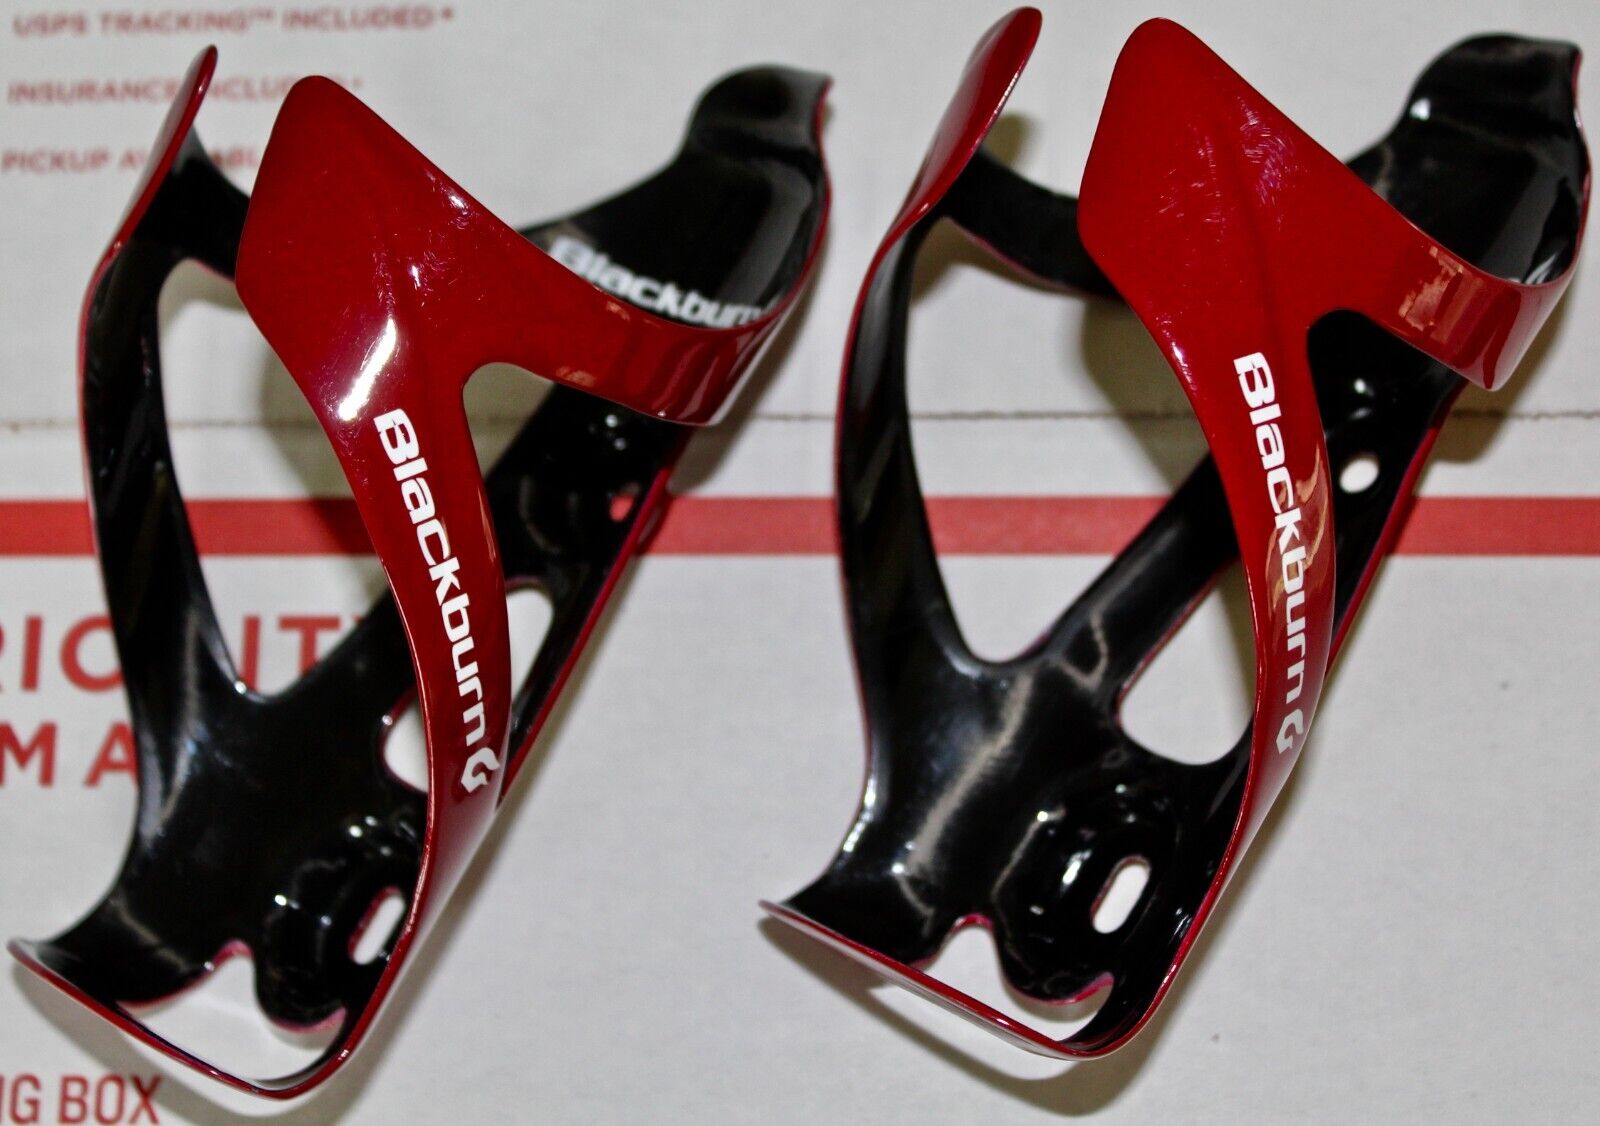 Blackburn Carbon Water Bottle Cages, Camber Pair, Red, Little Use!